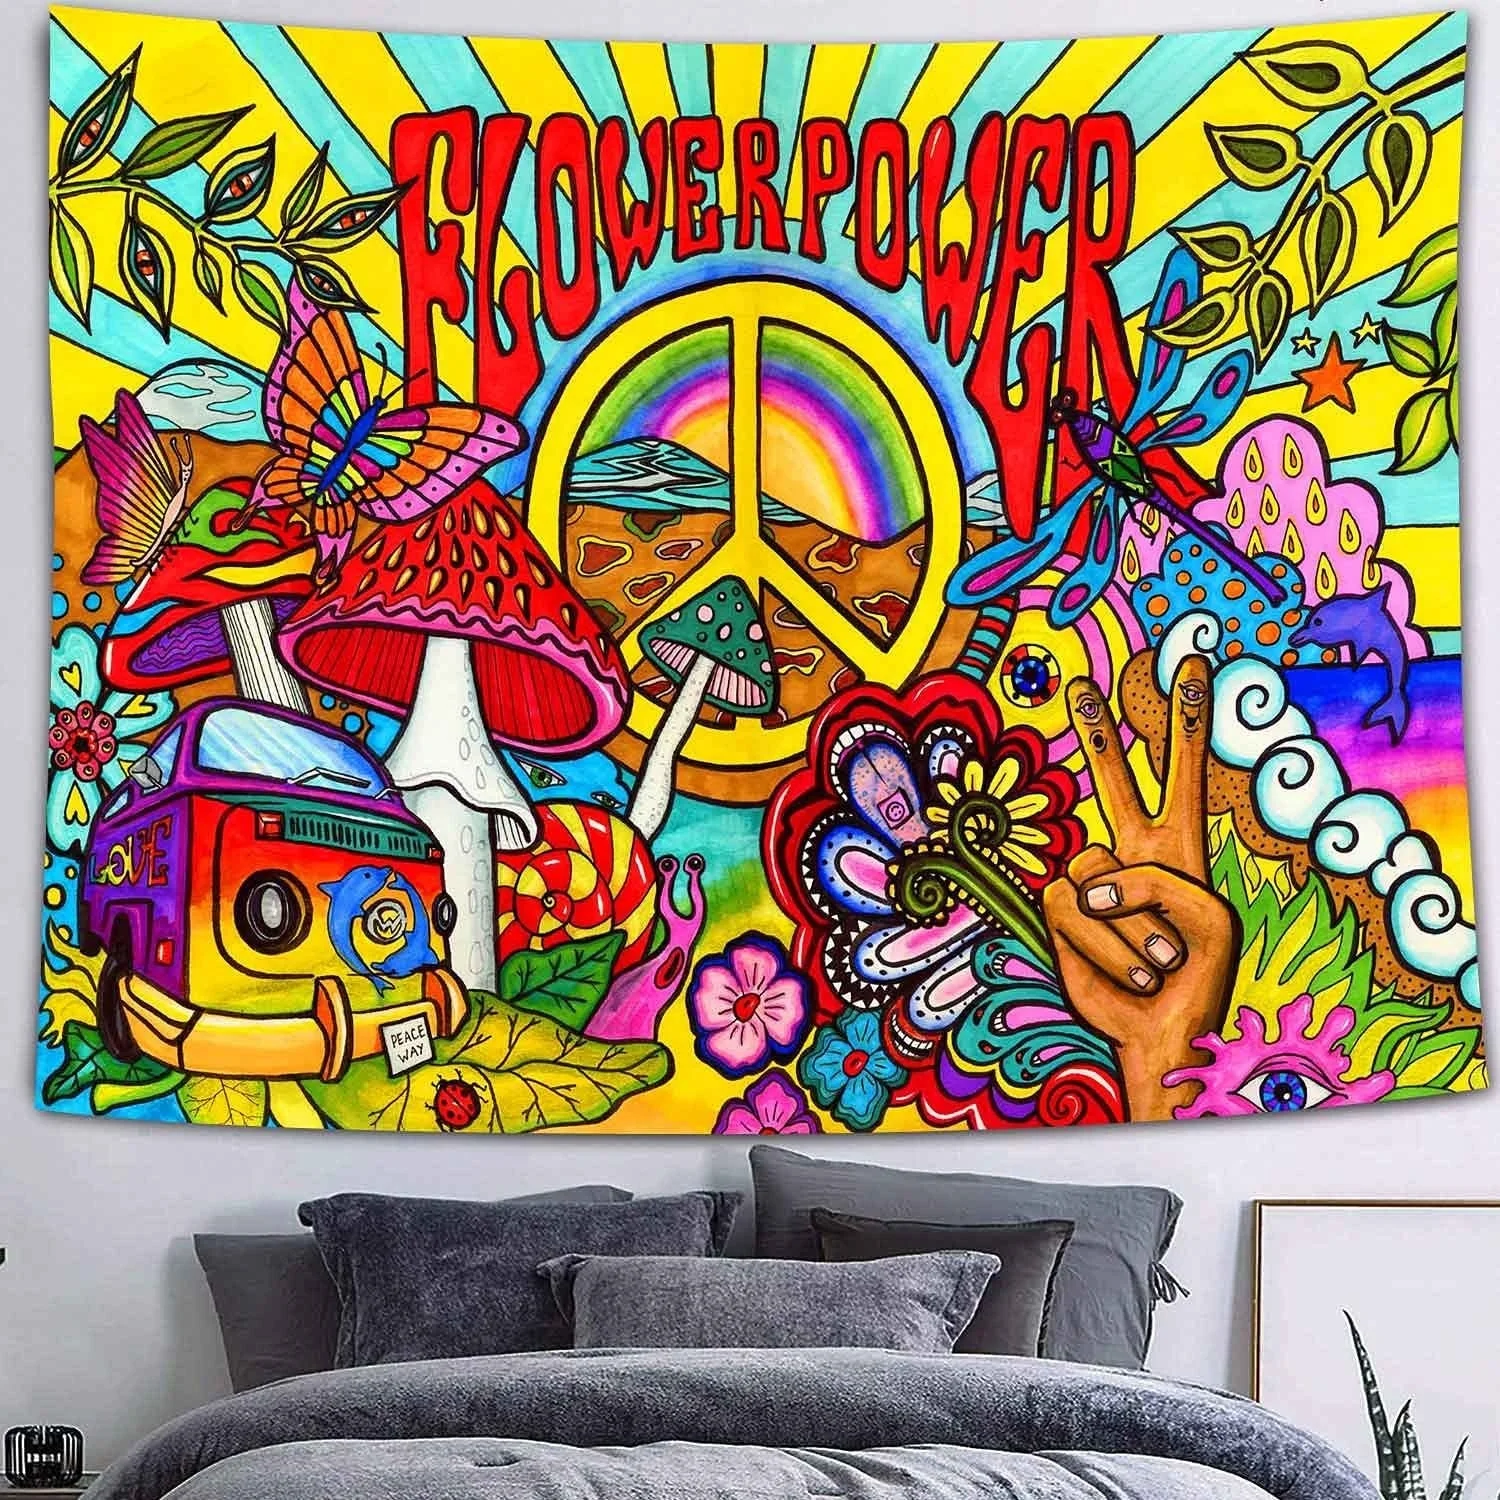 

ForeverStar Hippie Groovy Tapestry Peace And Love Symbol Colorful Art Wall Hanging Tapestries Dorm Bedroom Living